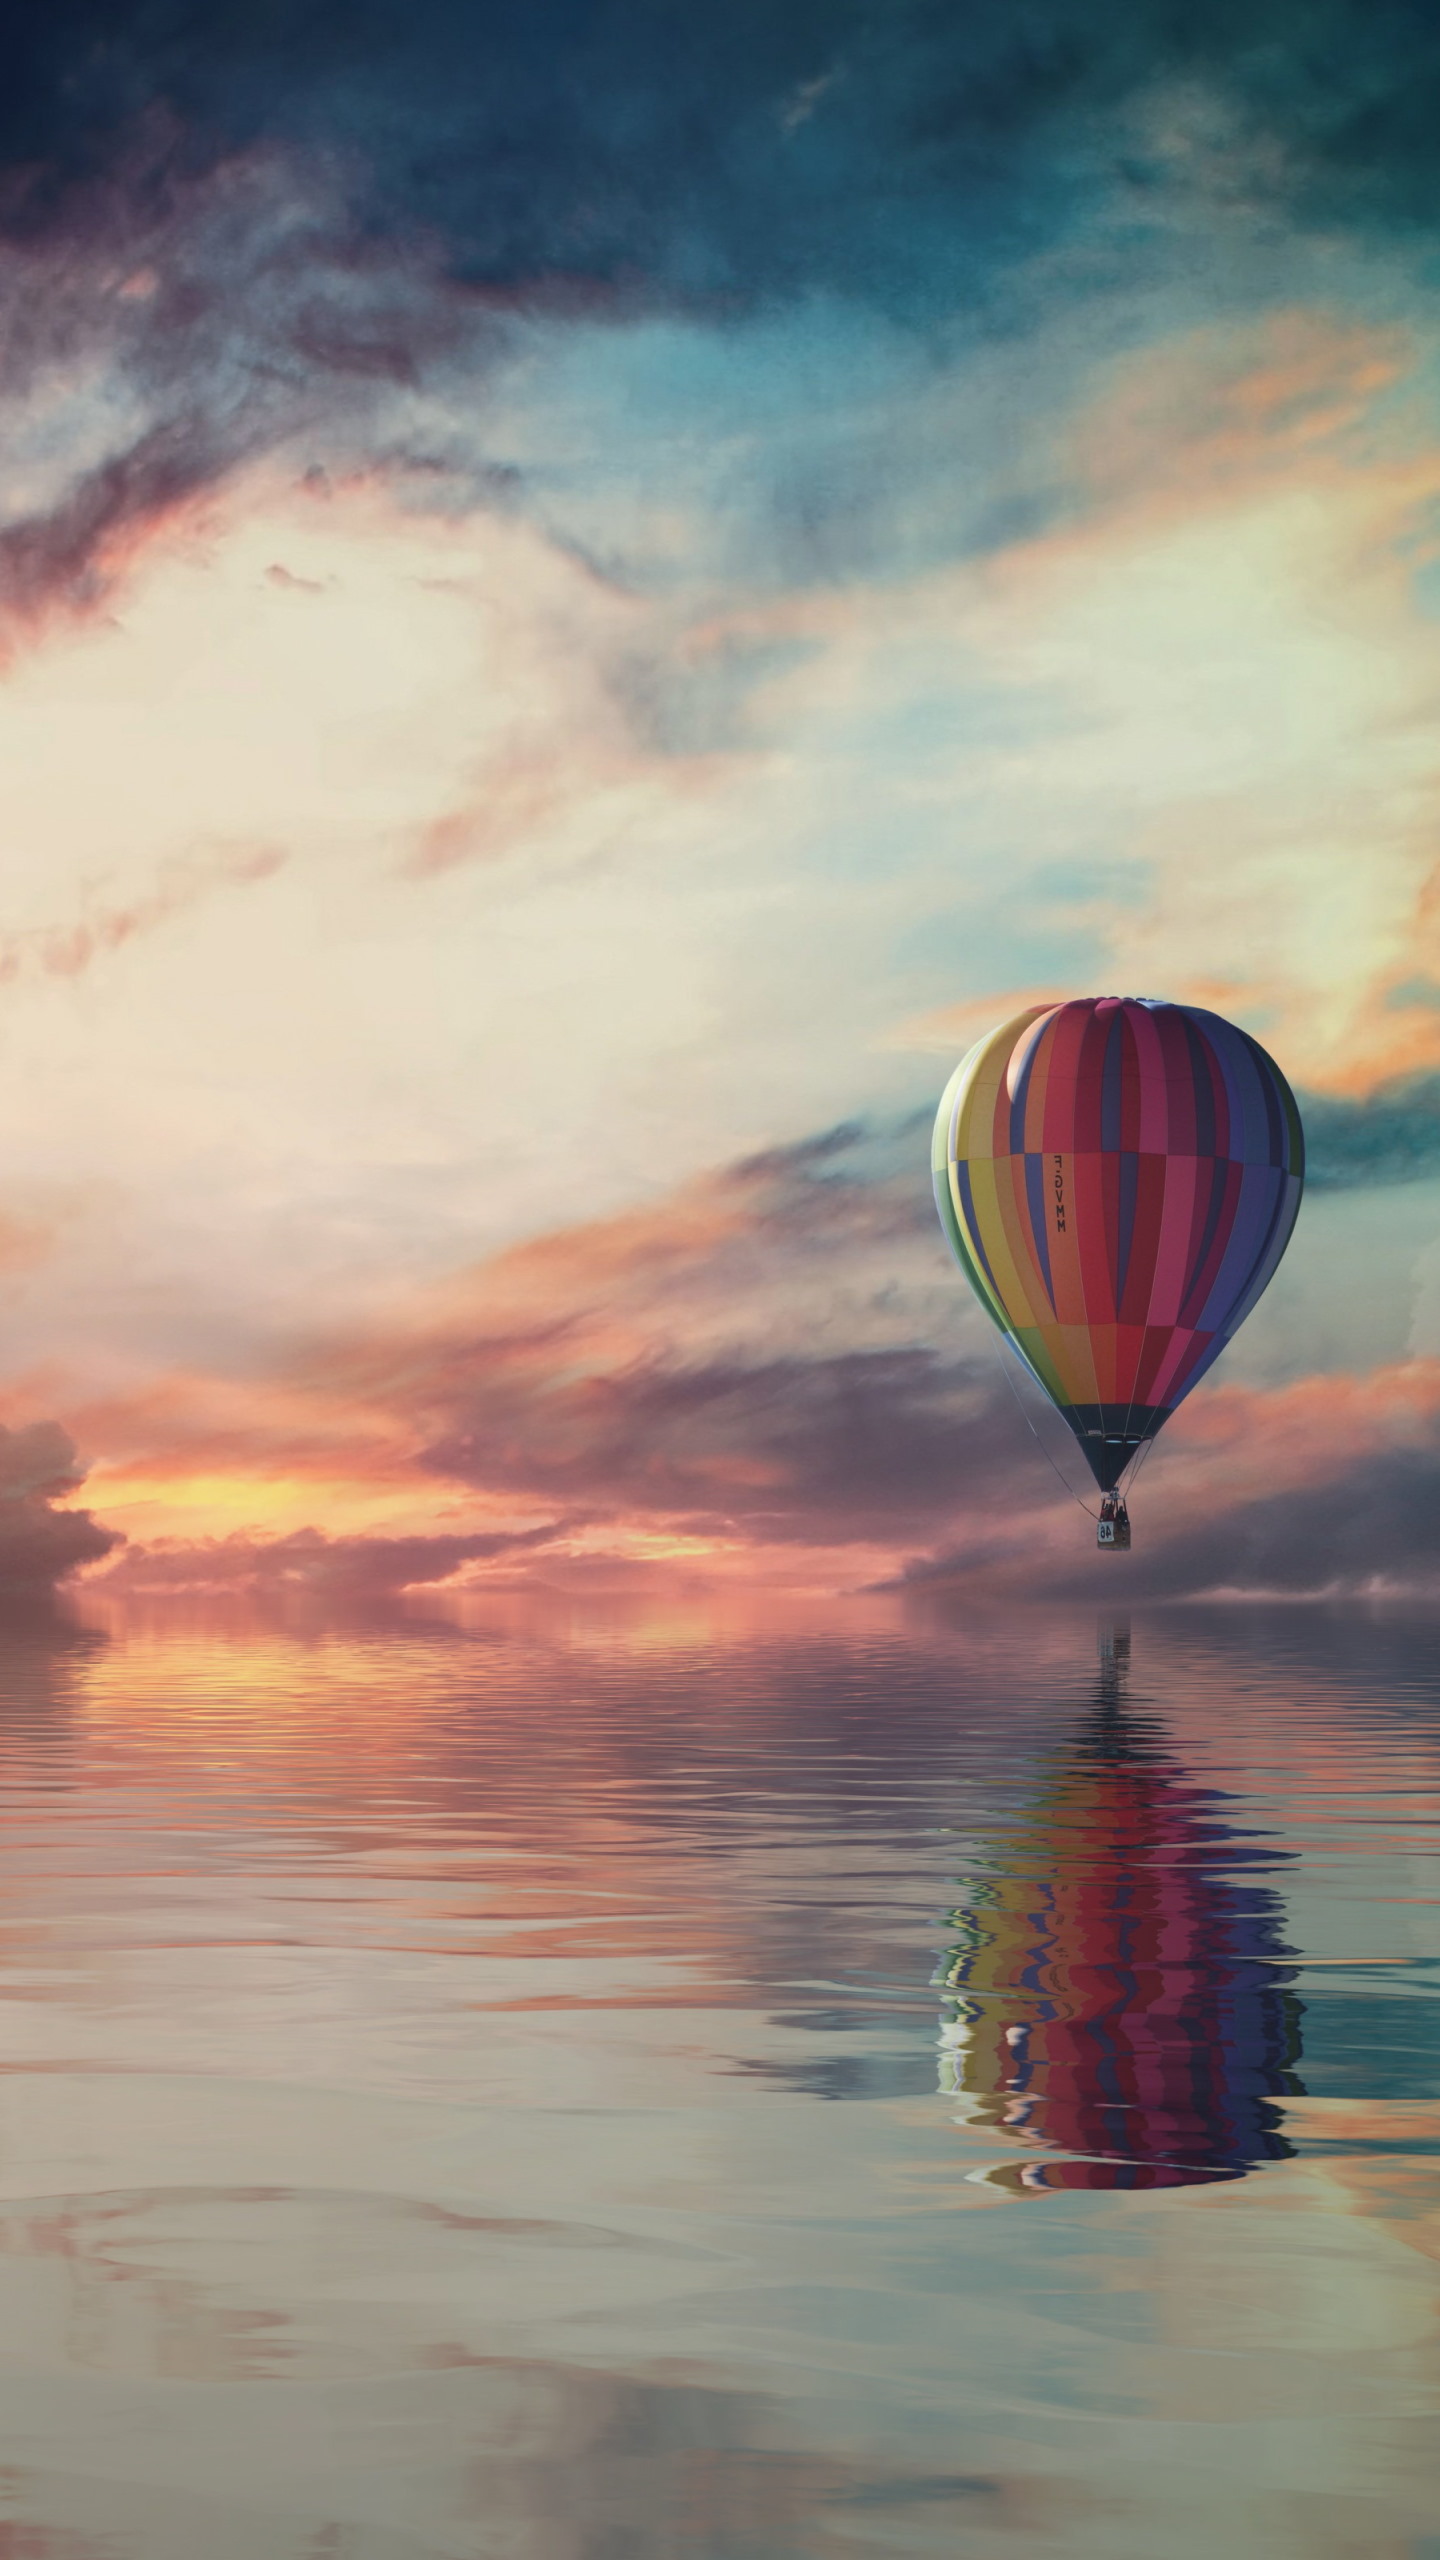 Fantasy travel with the hot air balloon wallpaper 1440x2560